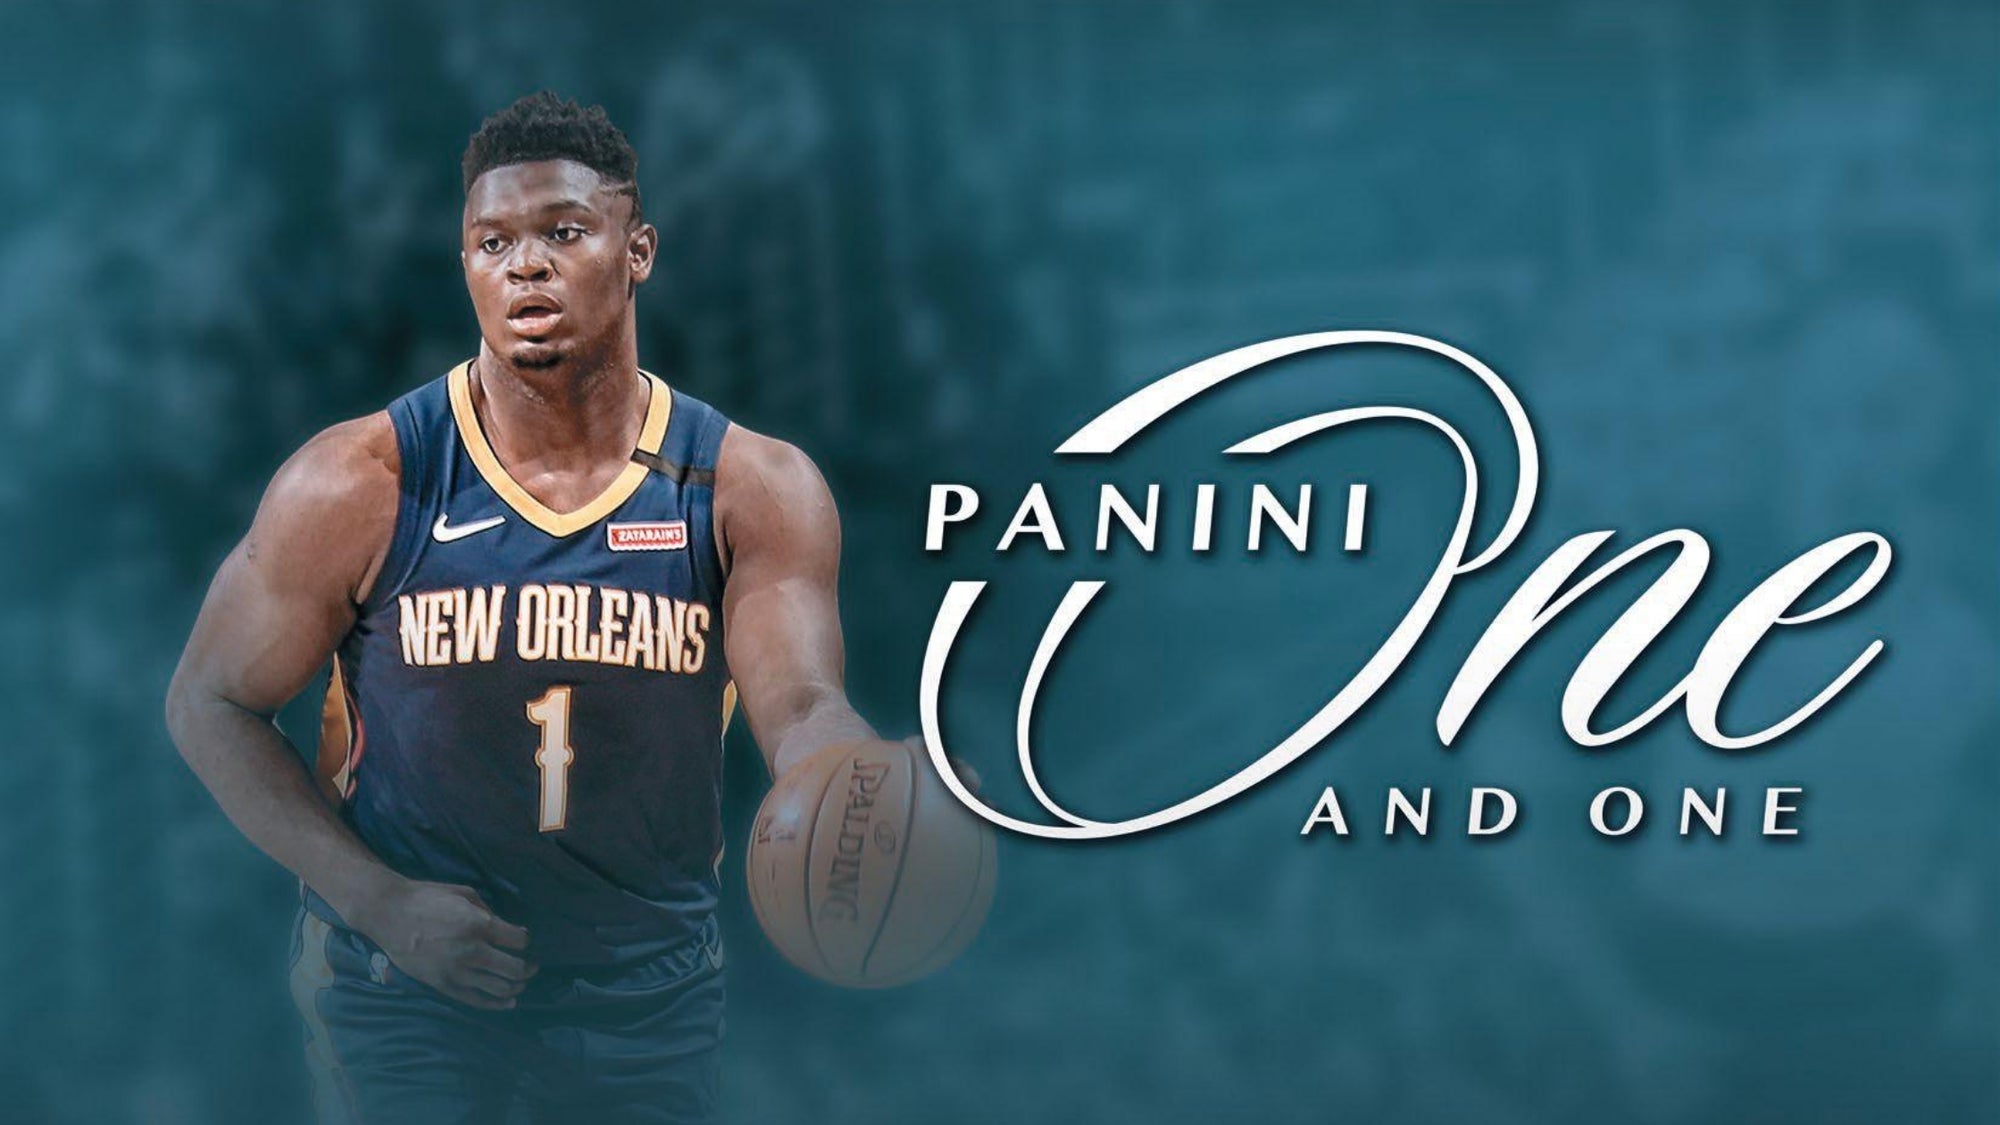 Panini One And One Basketball Revealed!